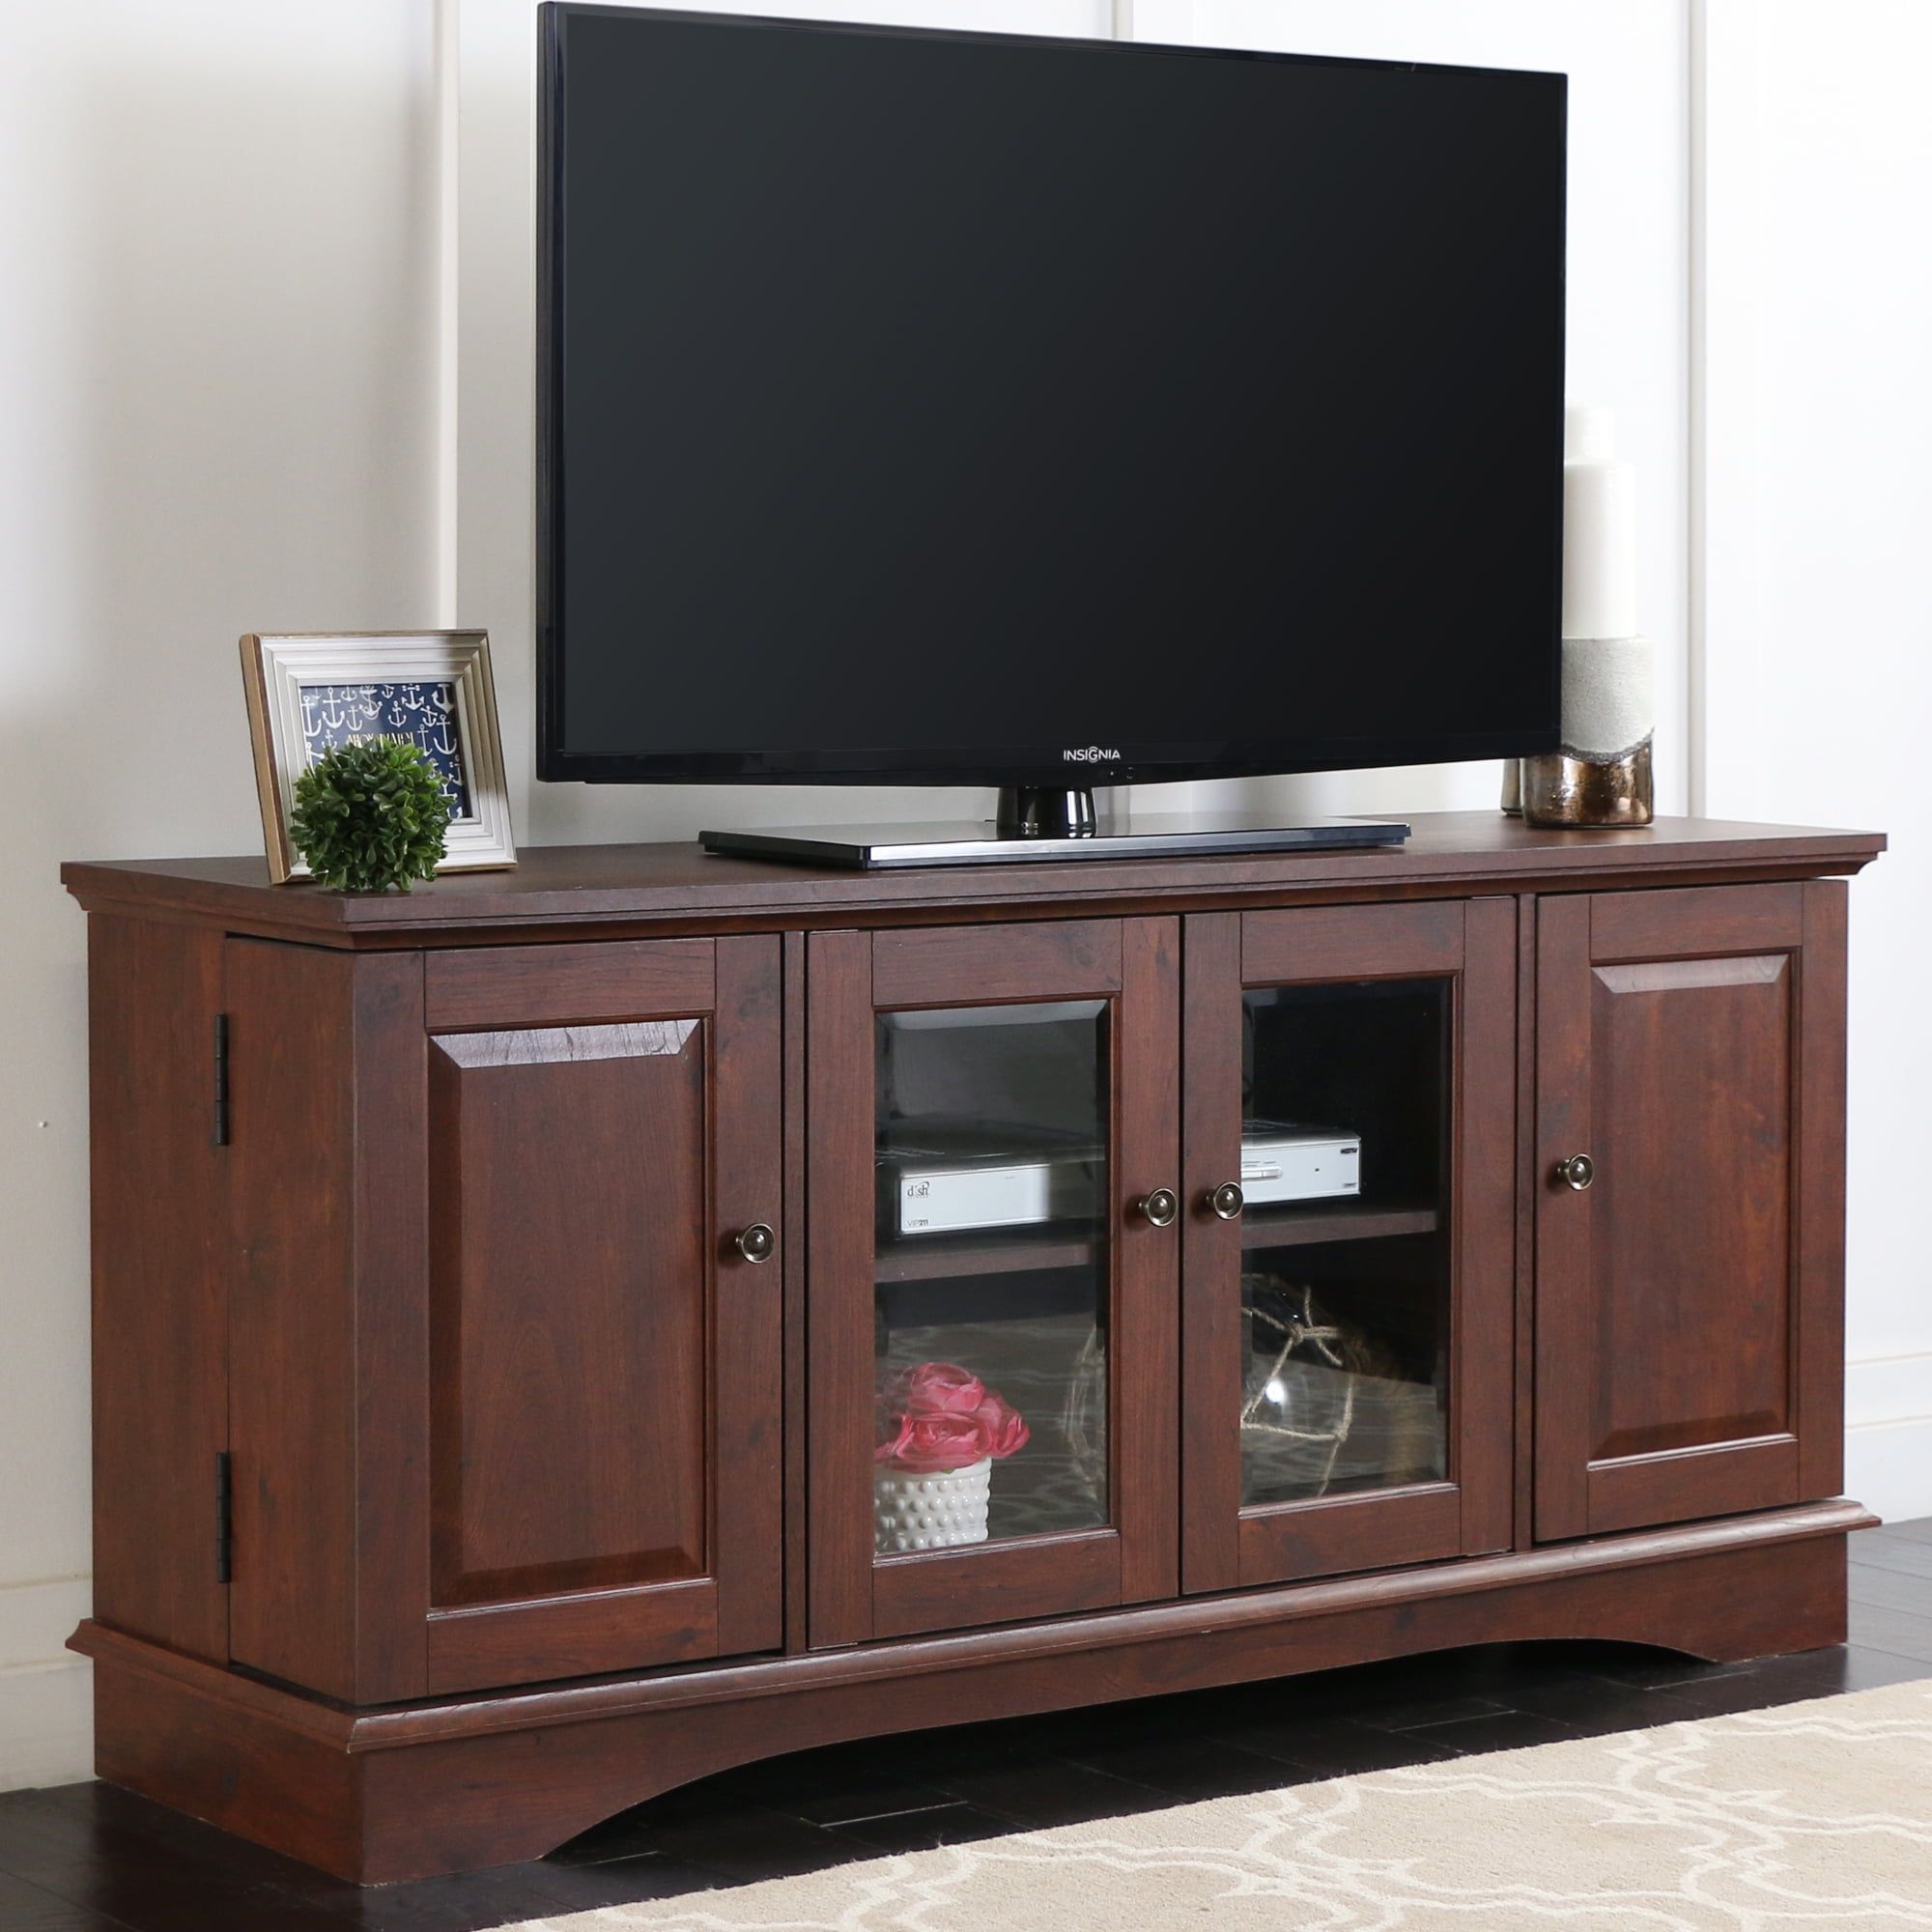 Walker Edison Wood Tv Stand For Tvs Up To 58?, Traditional Brown – Home In 110" Tvs Wood Tv Cabinet With Drawers (Gallery 12 of 20)